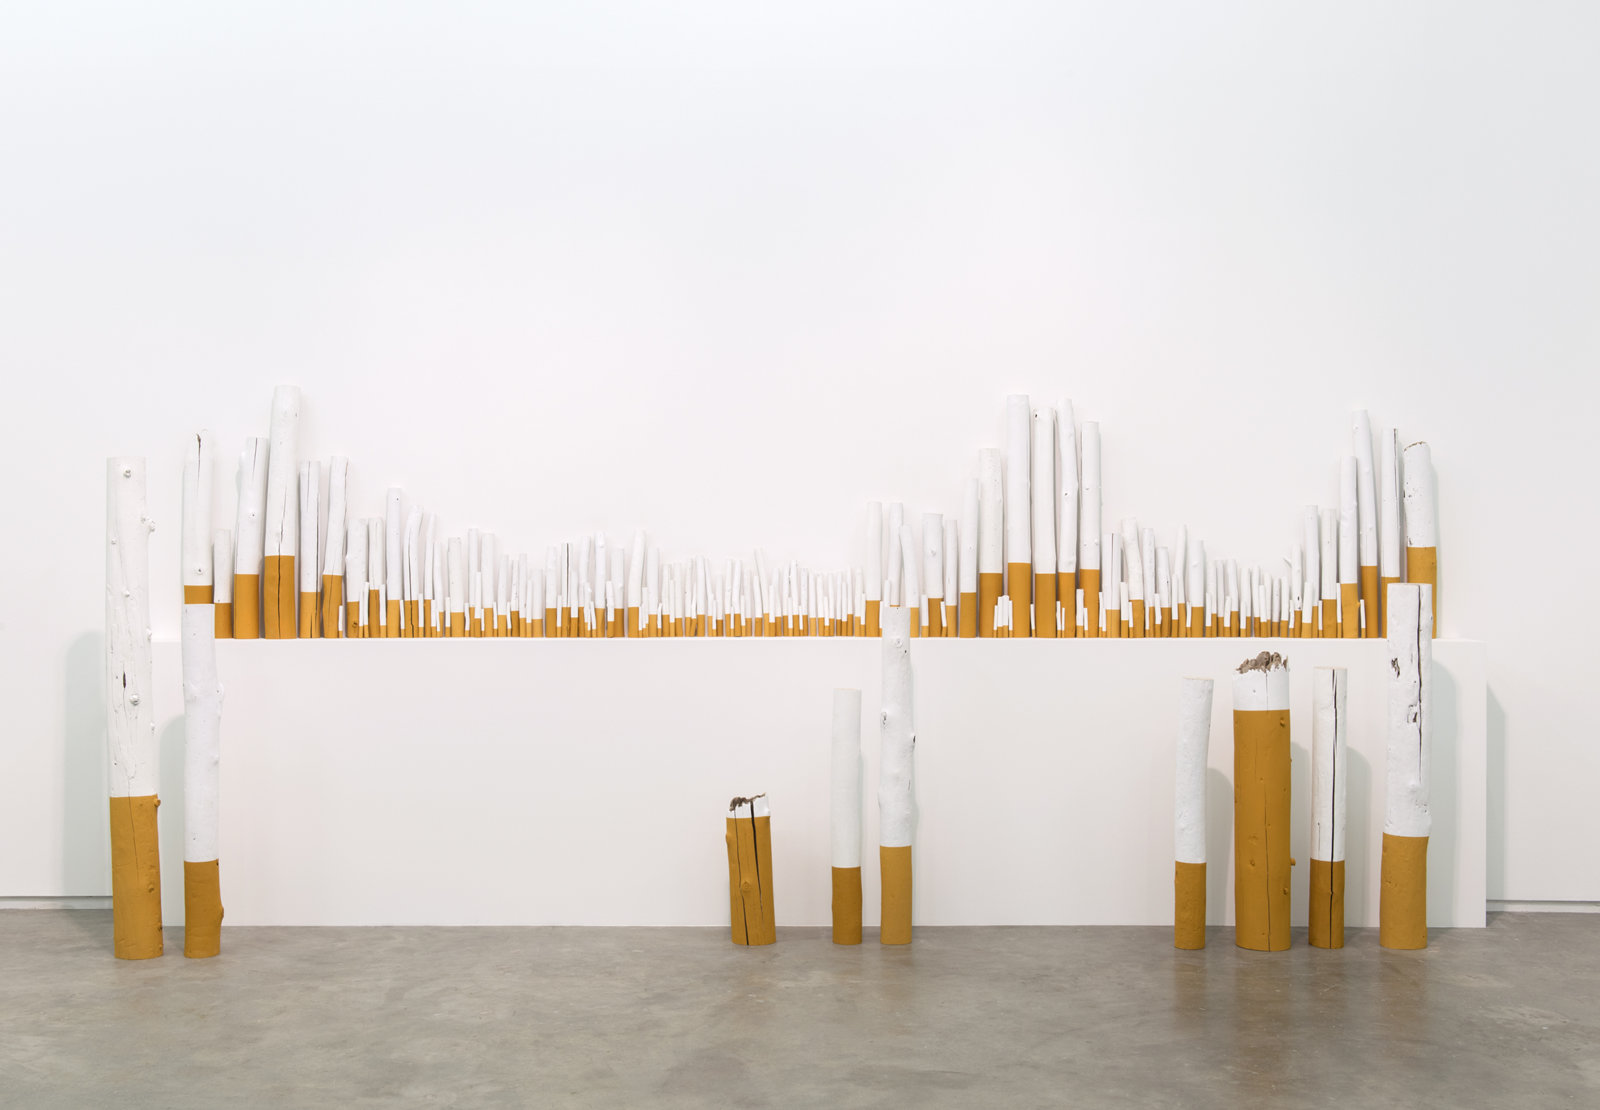 Liz Magor, The Rules, 2012, wood, paint, 38 x 180 x 10 in. (97 x 457 x 25 cm)